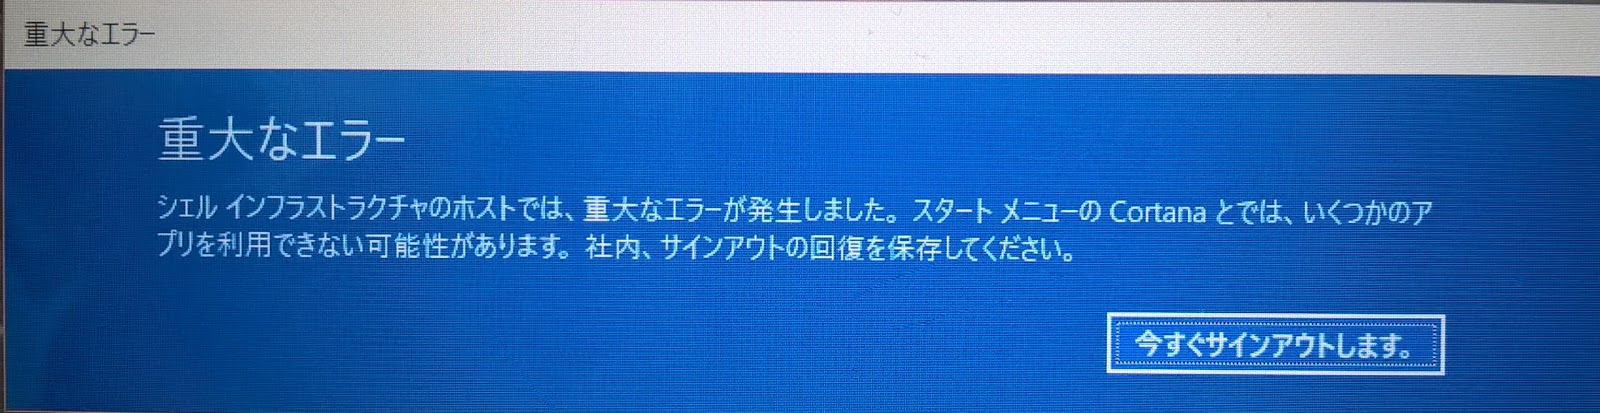 notepad: Windows10 Insider Preview で重大なエラー